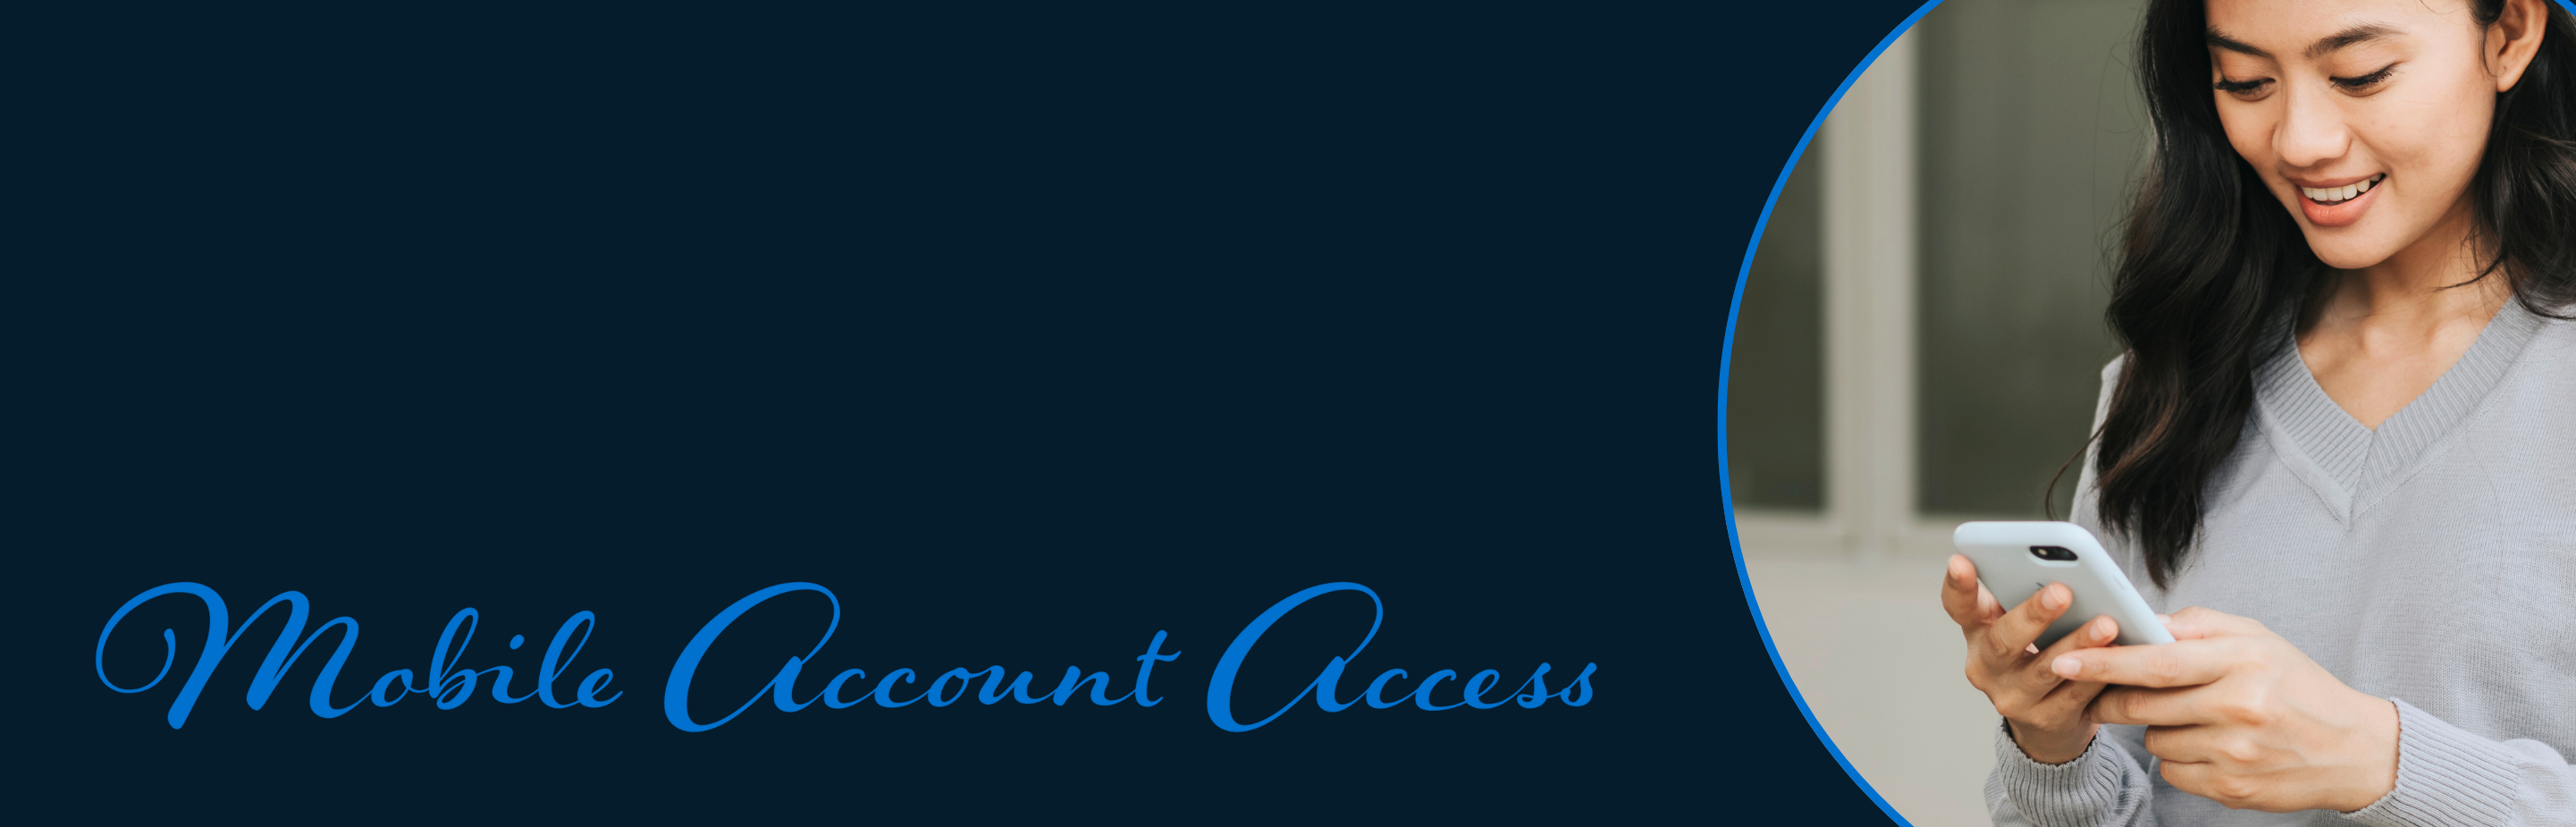 Mobile Account Access